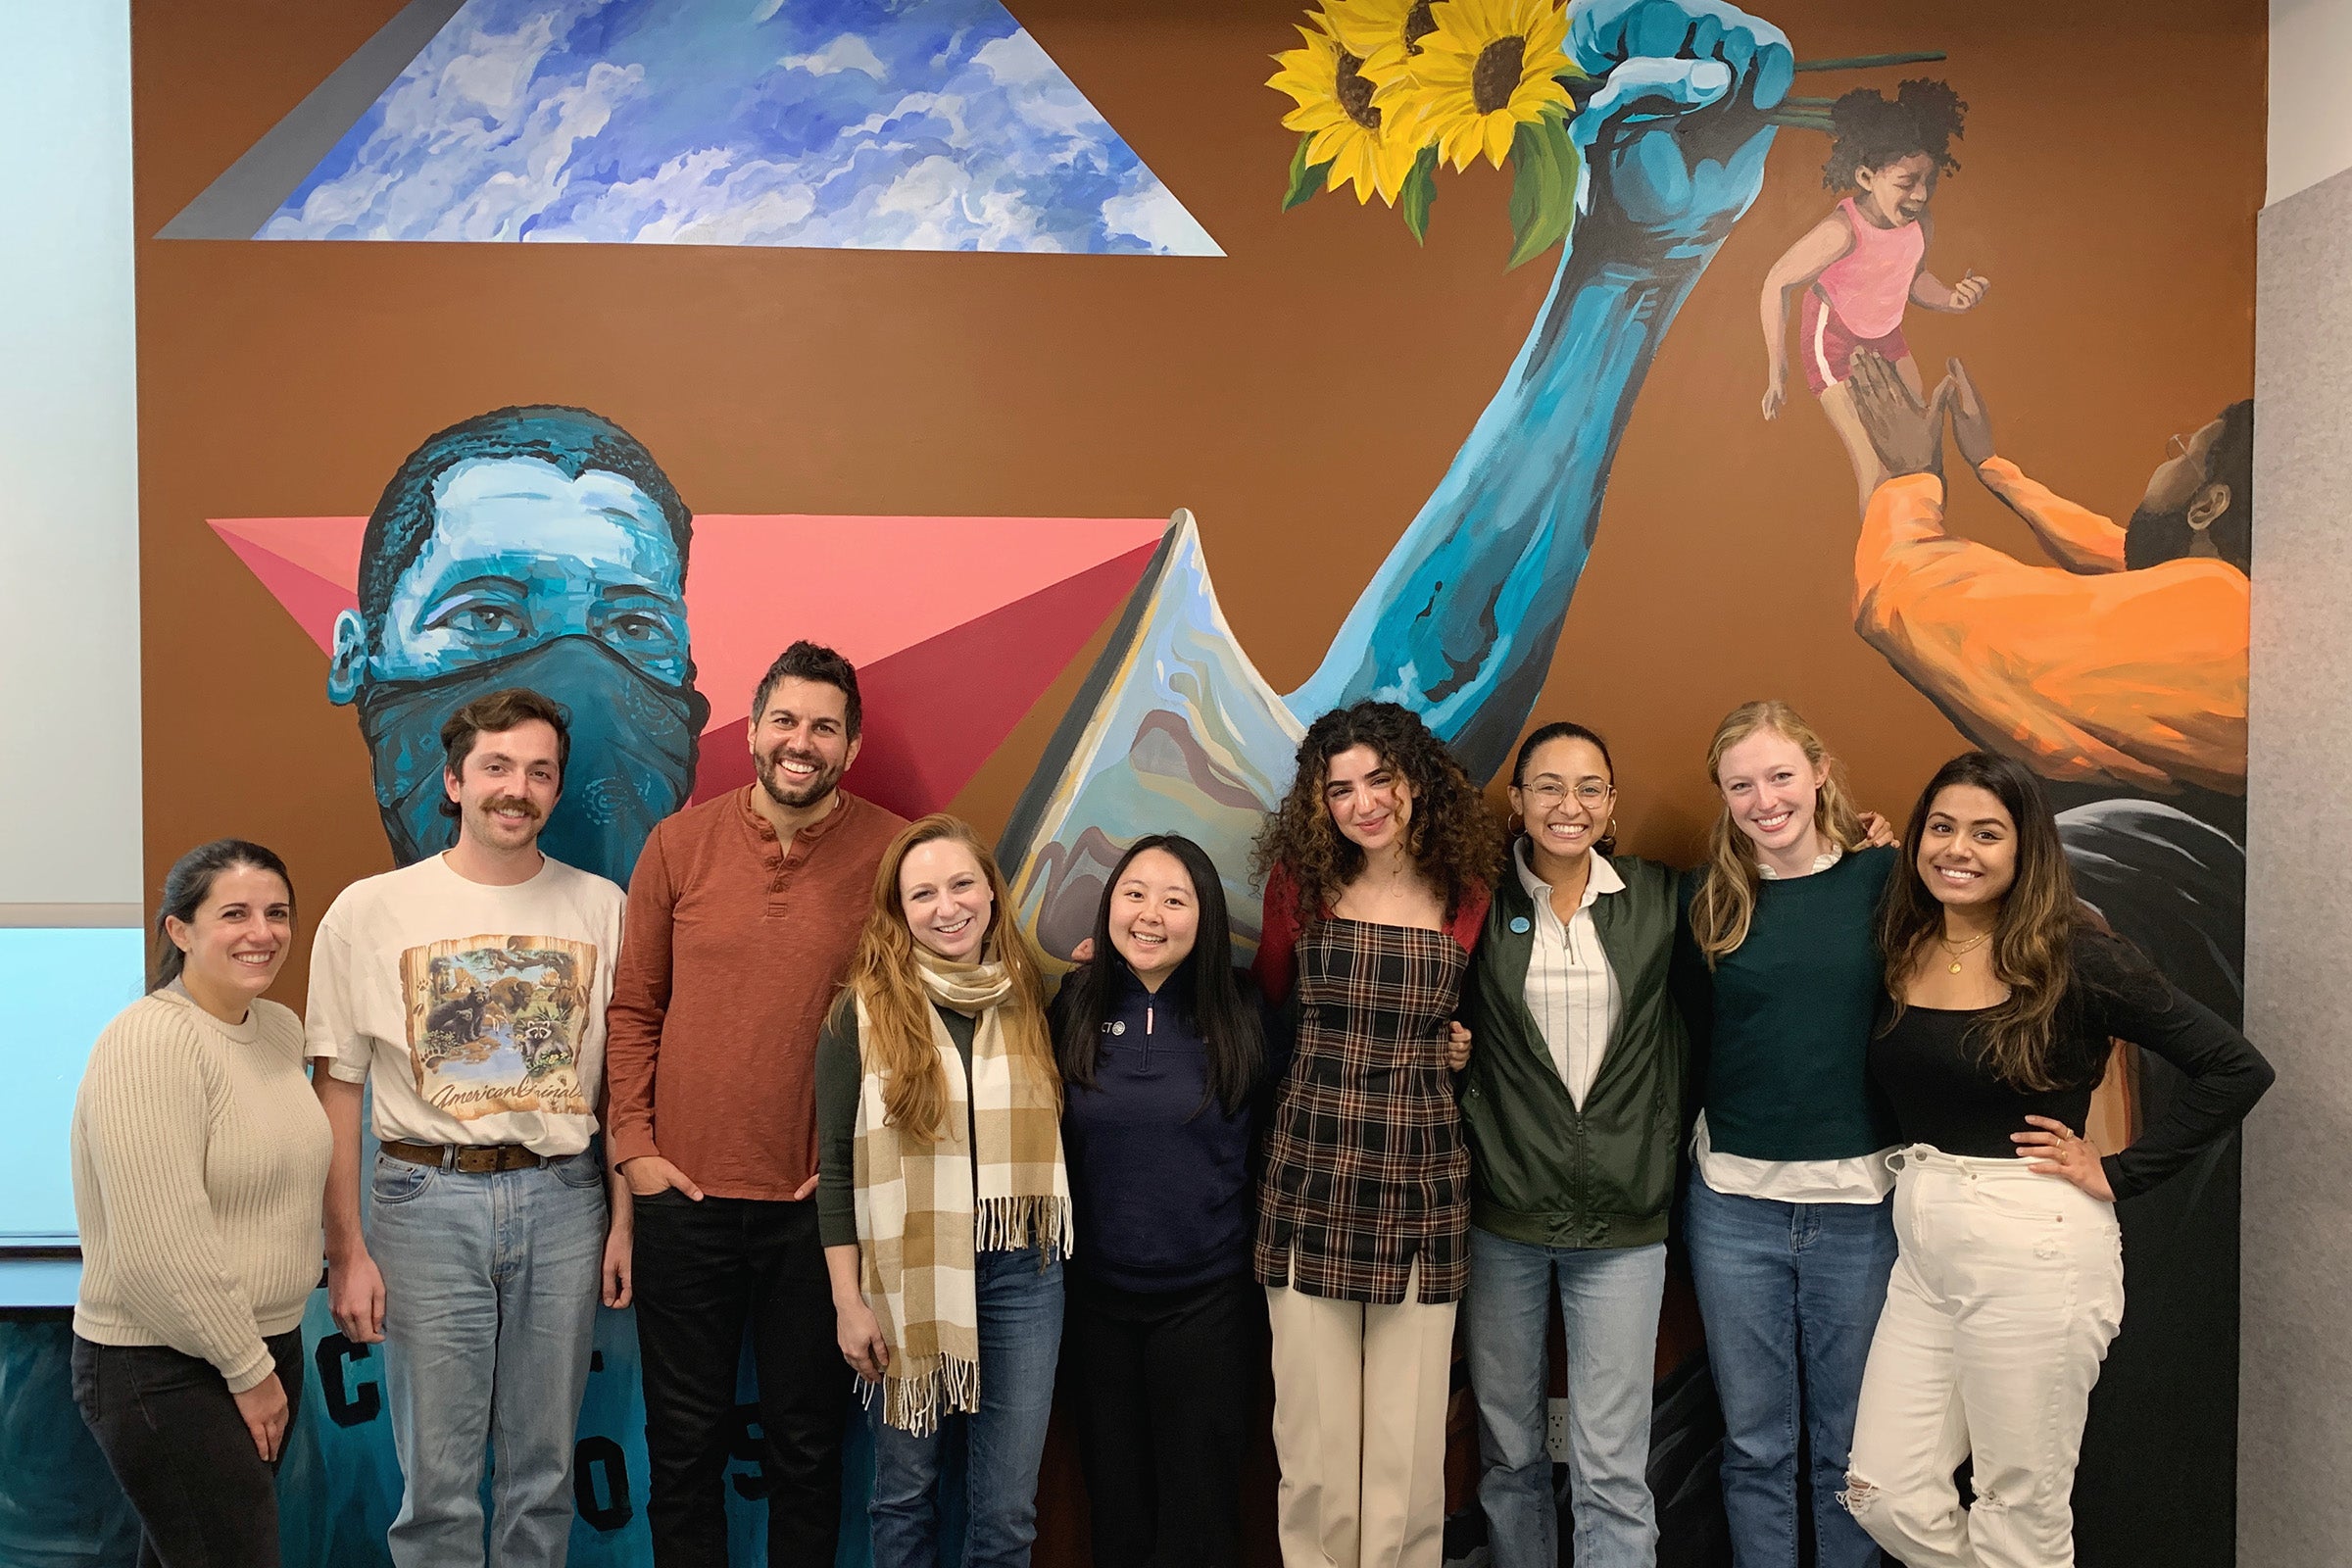 Criminal Justice Appellate Clinic students and directors pose in front of a mural at the MacArthur Justice Center in Washington, DC.